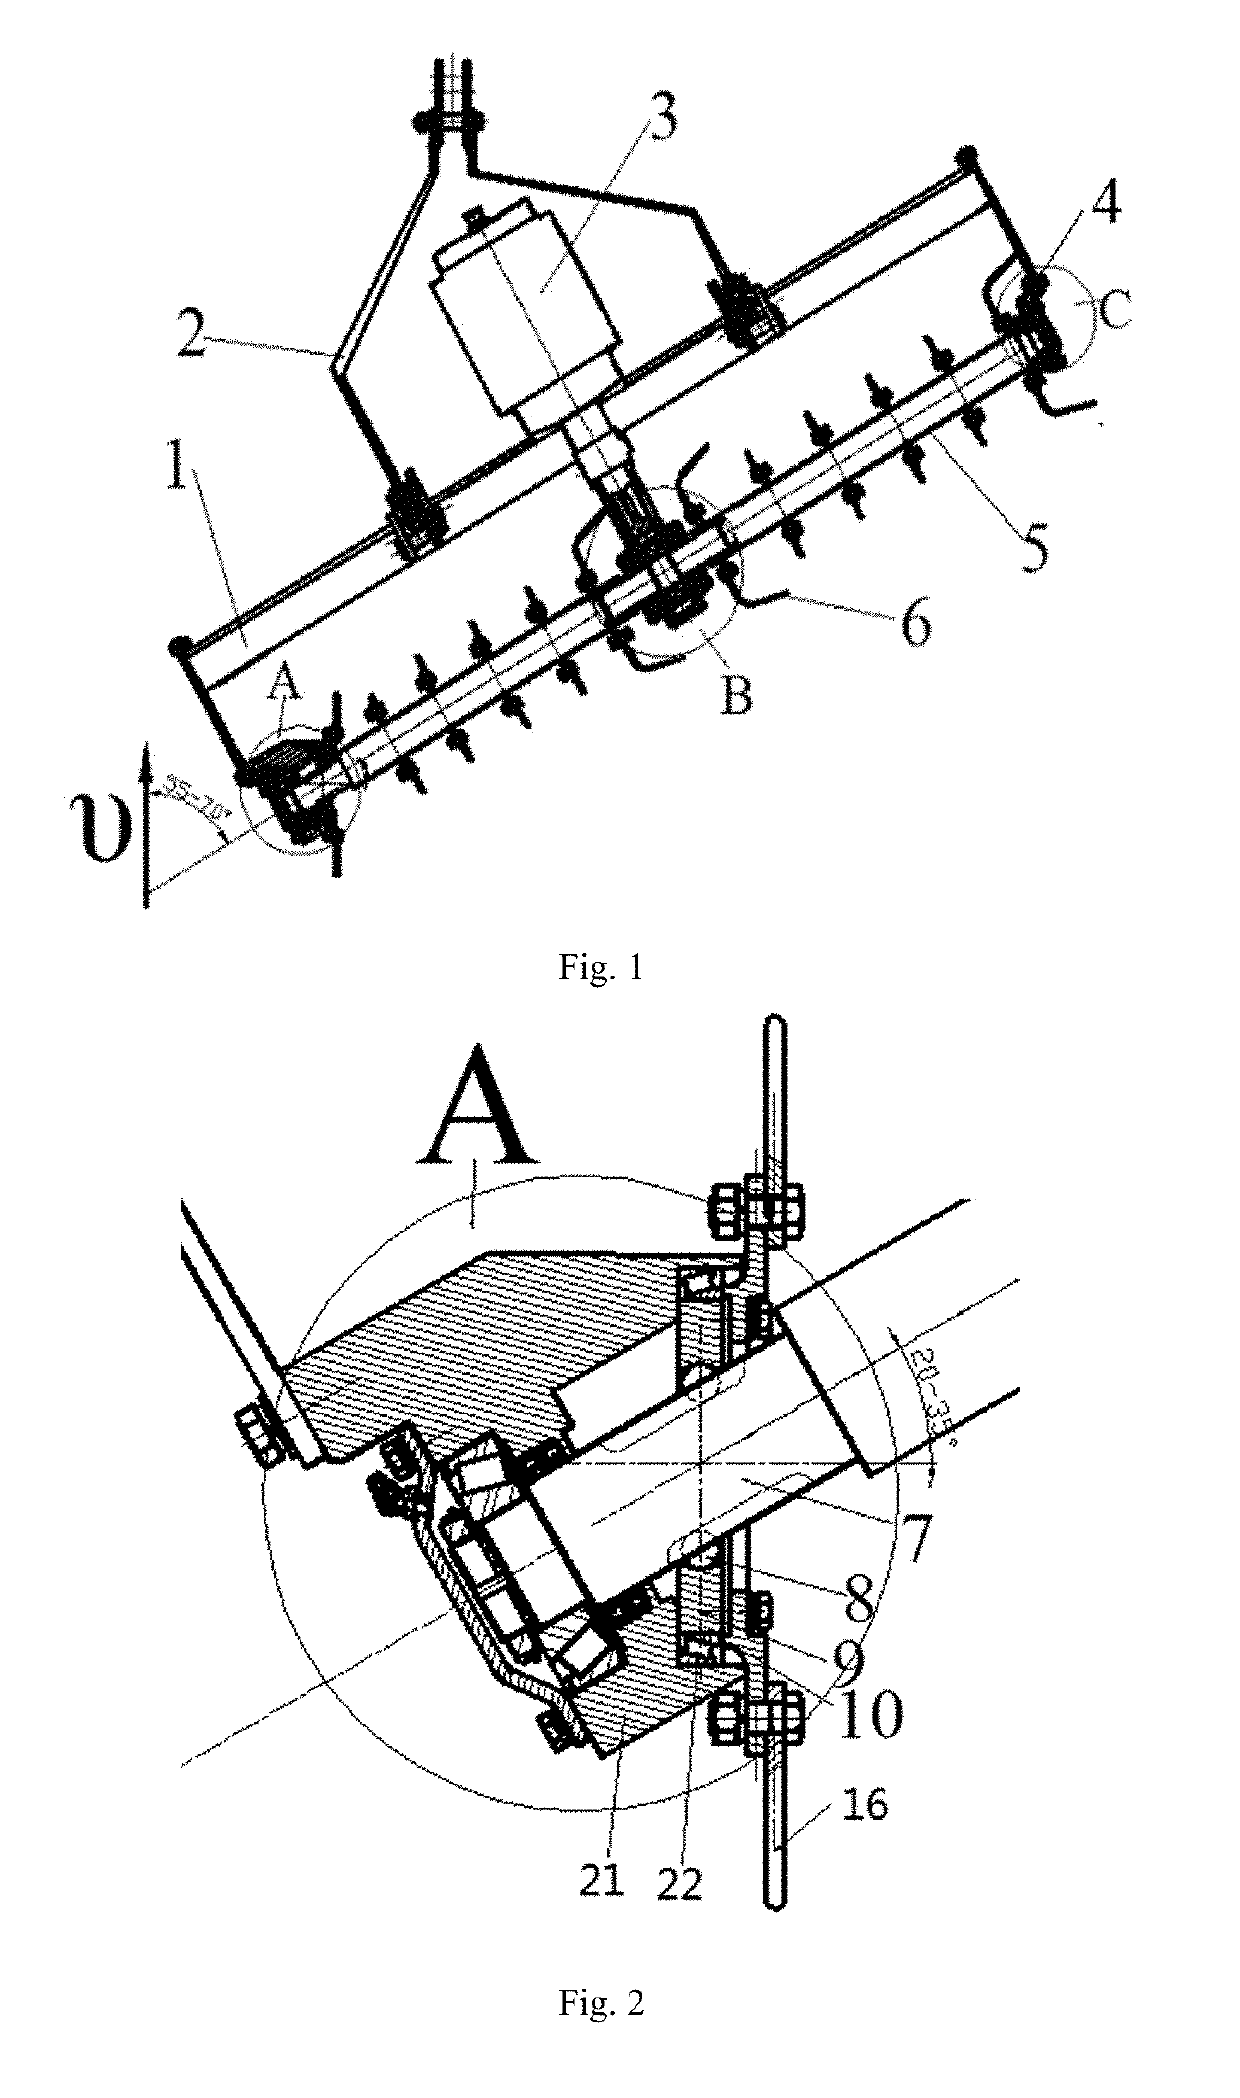 An oblique submerged reverse deep rotary tillage device